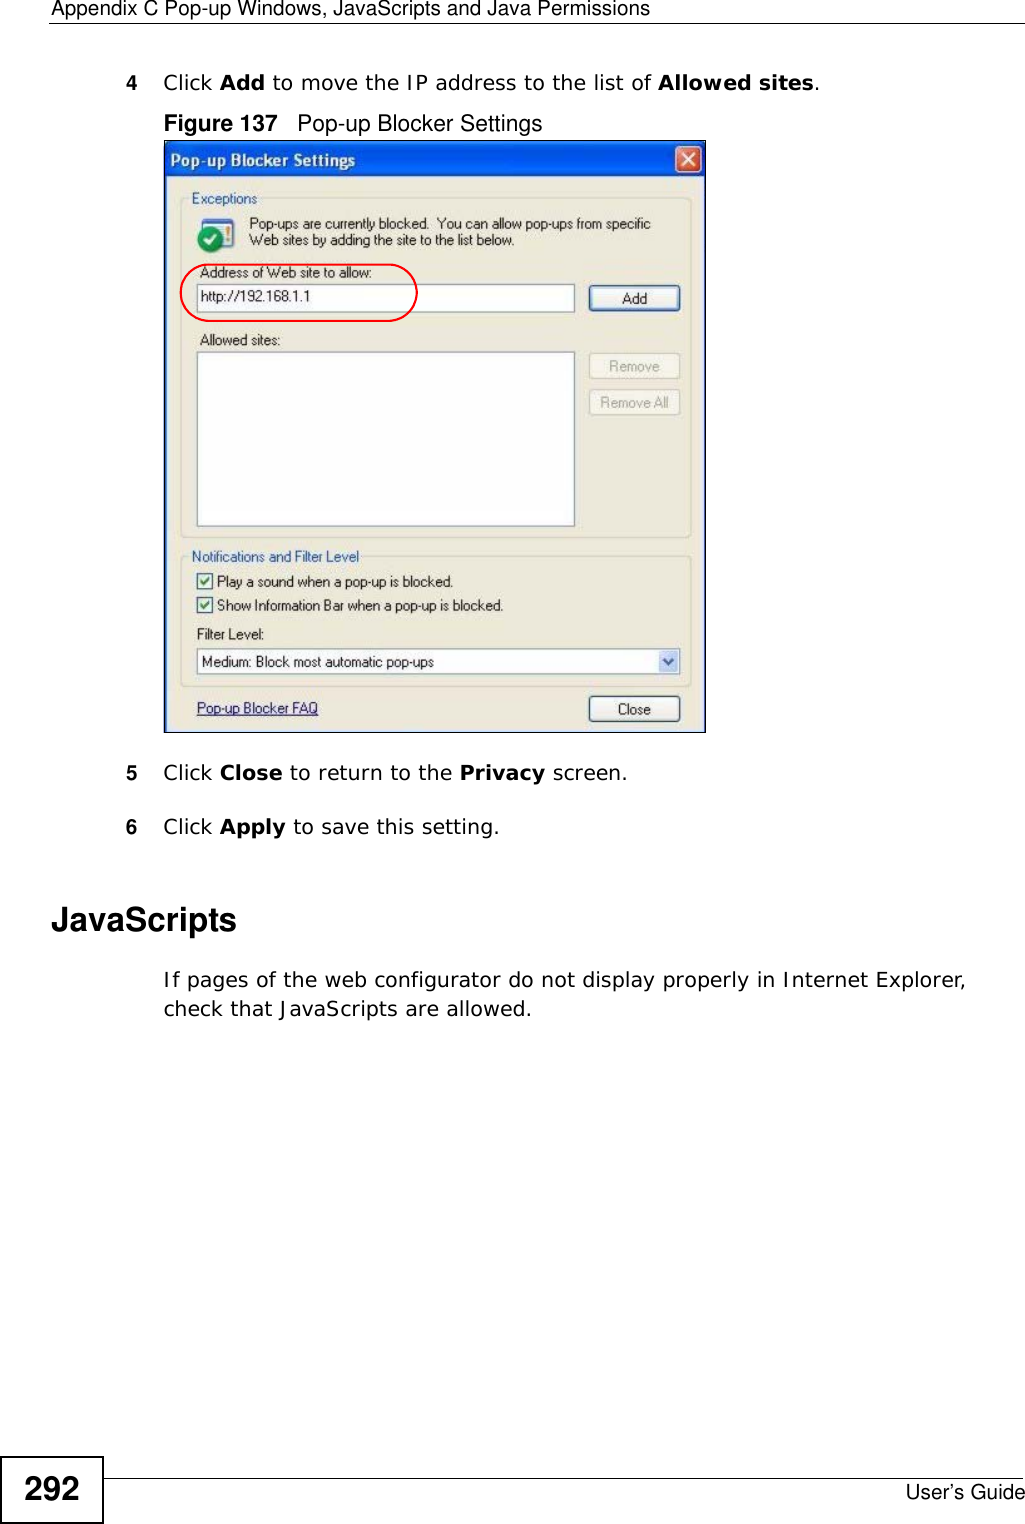 Appendix C Pop-up Windows, JavaScripts and Java PermissionsUser’s Guide2924Click Add to move the IP address to the list of Allowed sites.Figure 137   Pop-up Blocker Settings5Click Close to return to the Privacy screen. 6Click Apply to save this setting. JavaScriptsIf pages of the web configurator do not display properly in Internet Explorer, check that JavaScripts are allowed. 